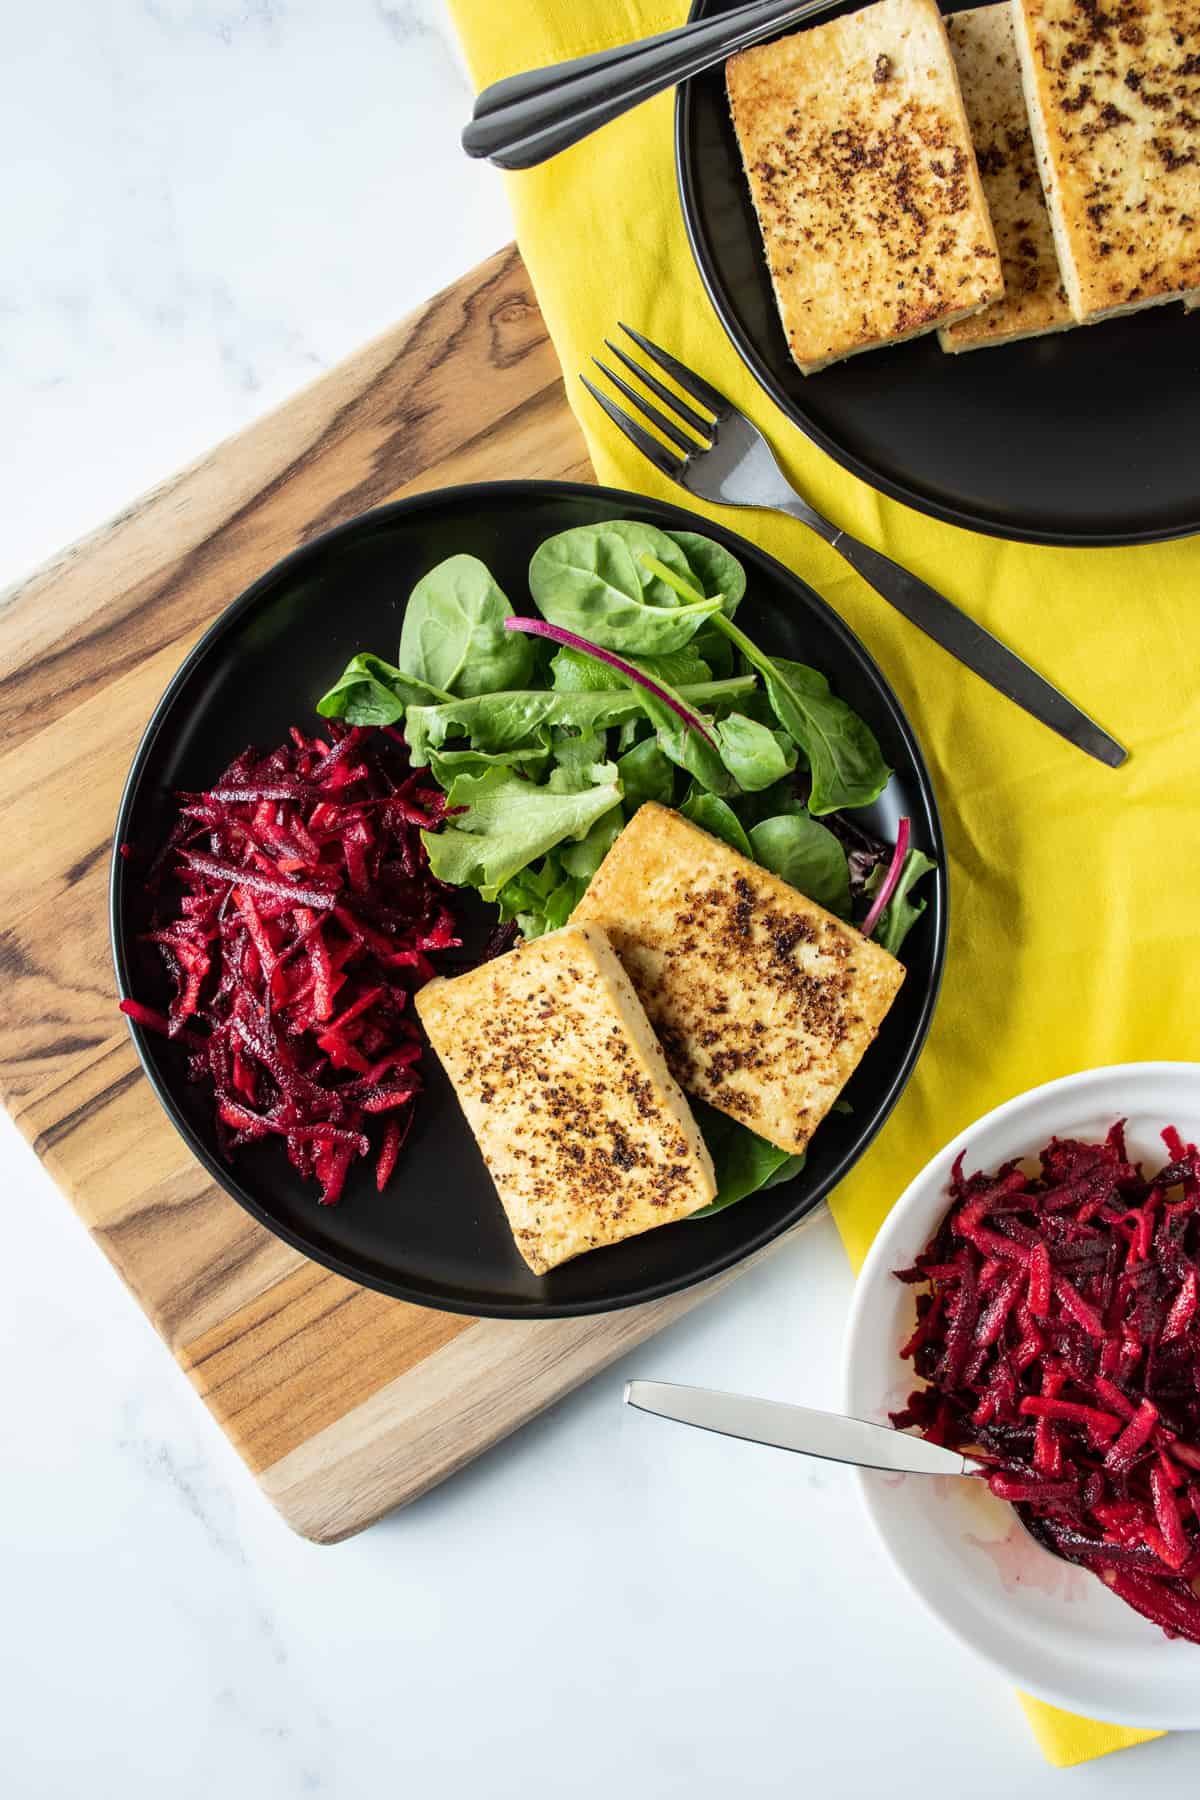 Overhead image of a plate with 2 slices of cooked tofu over a bed of greens, and a side of shredded beet salad.